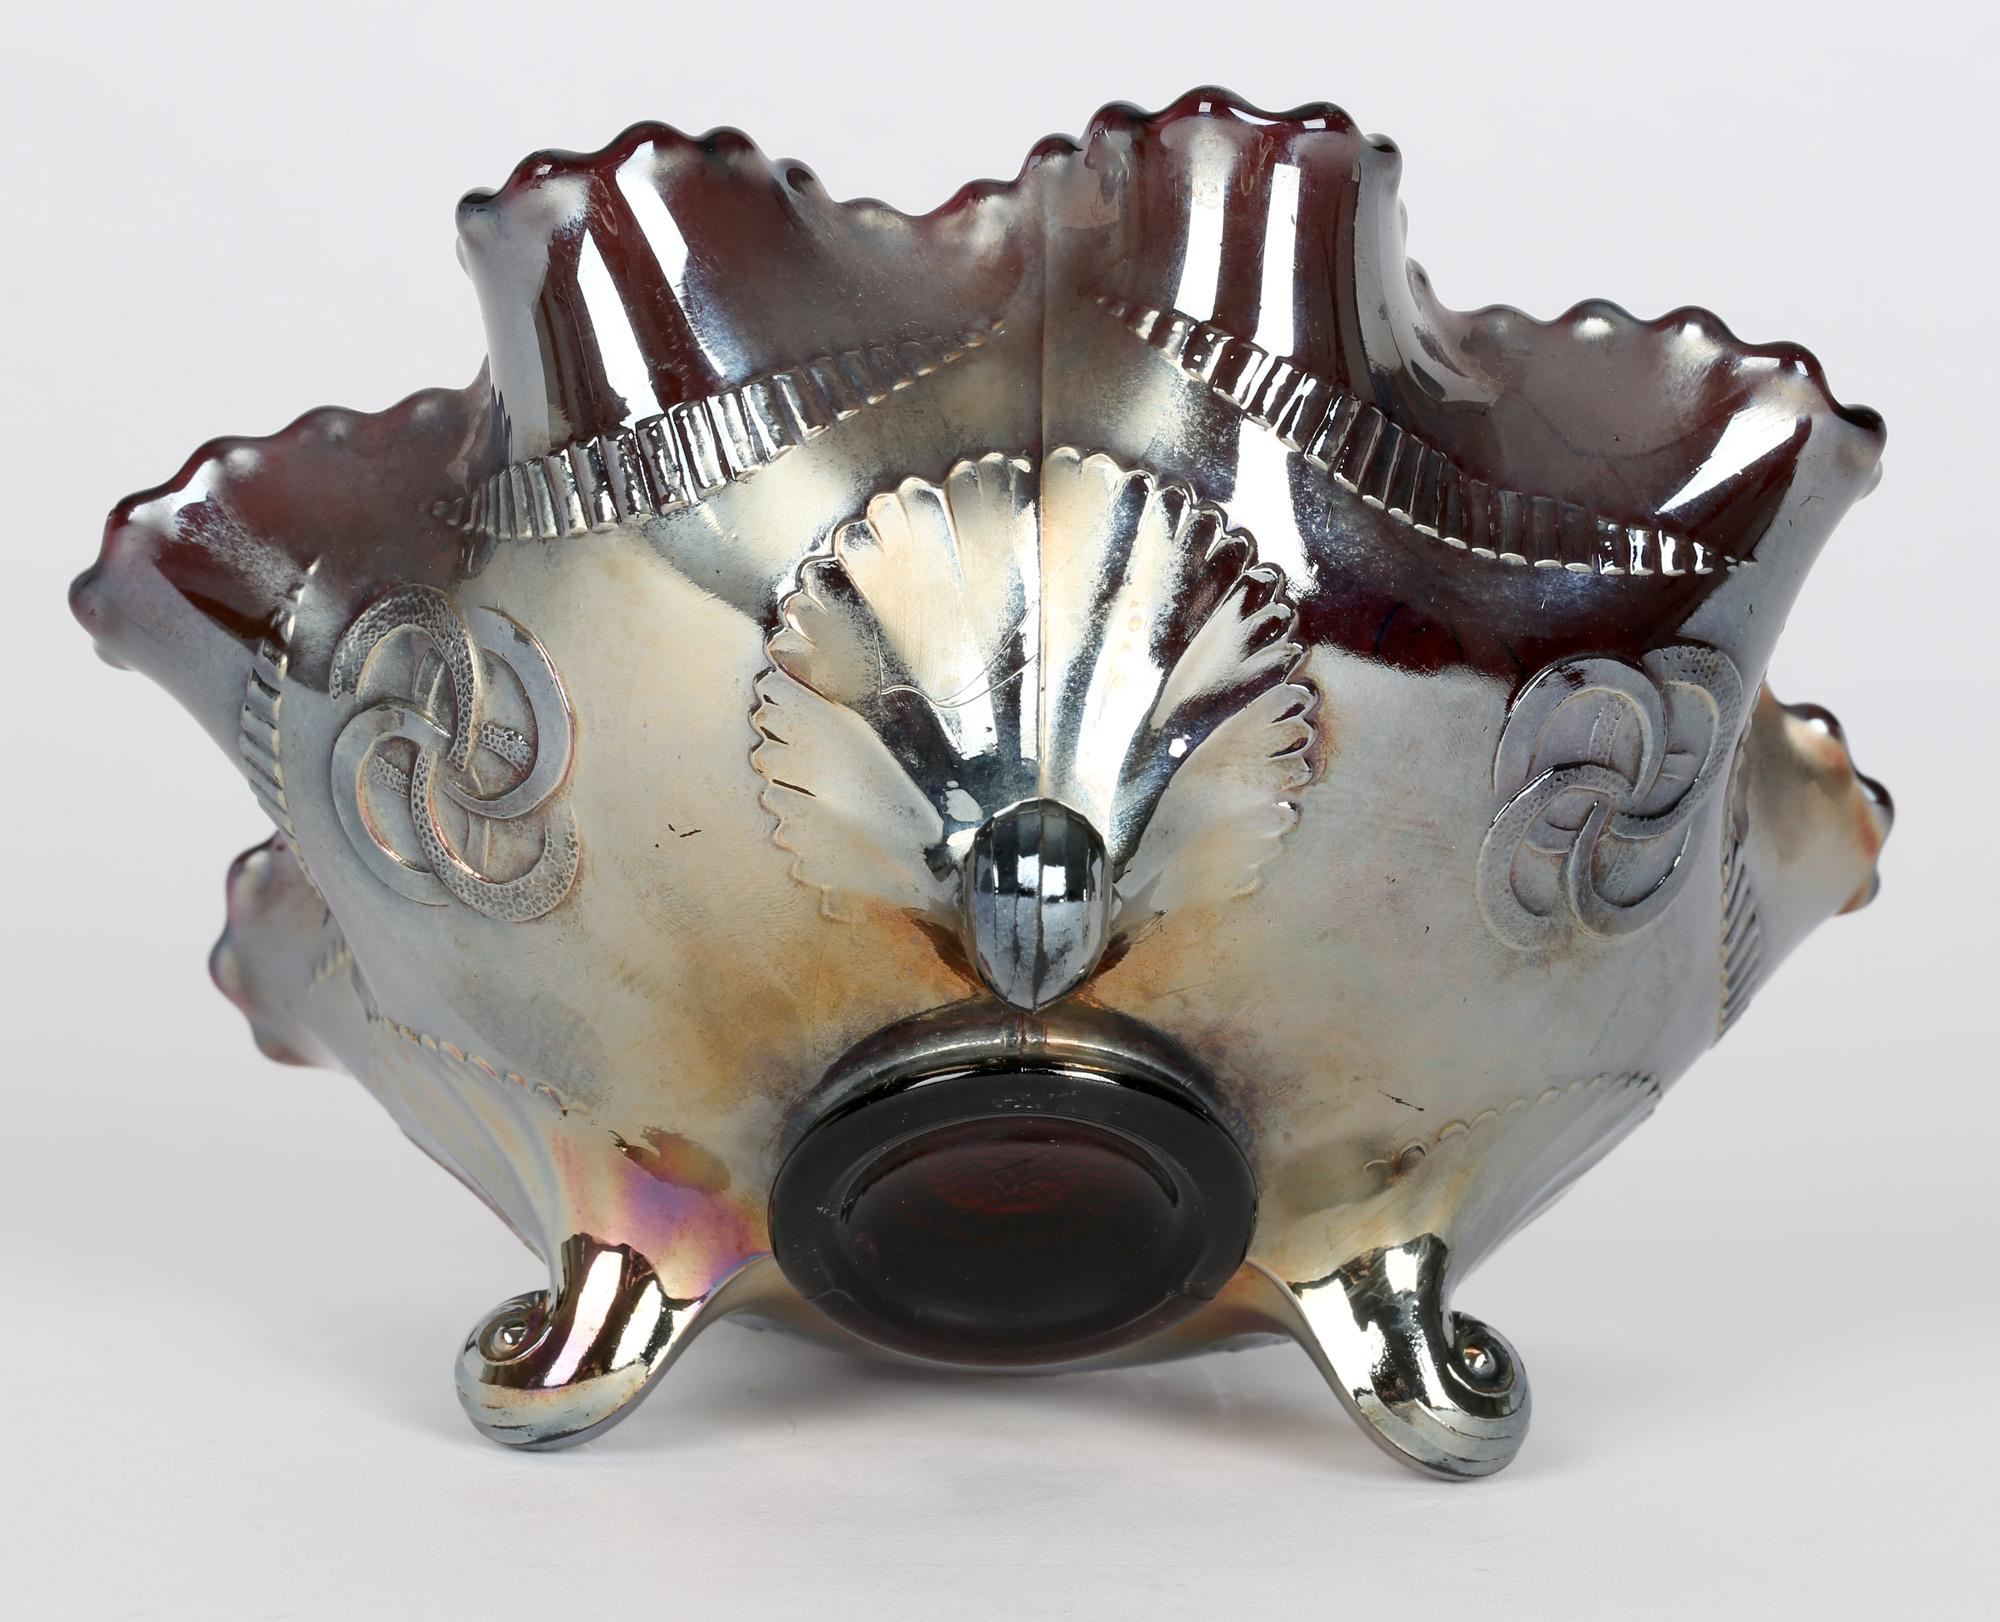 A stunning North American carnival amethyst glass bowl decorated in the Wishbone pattern by Northwood and dating from the early 20th century. The bowl stands raised on three scroll legs the rounded body with a pinched ruffled rim with the inner bowl